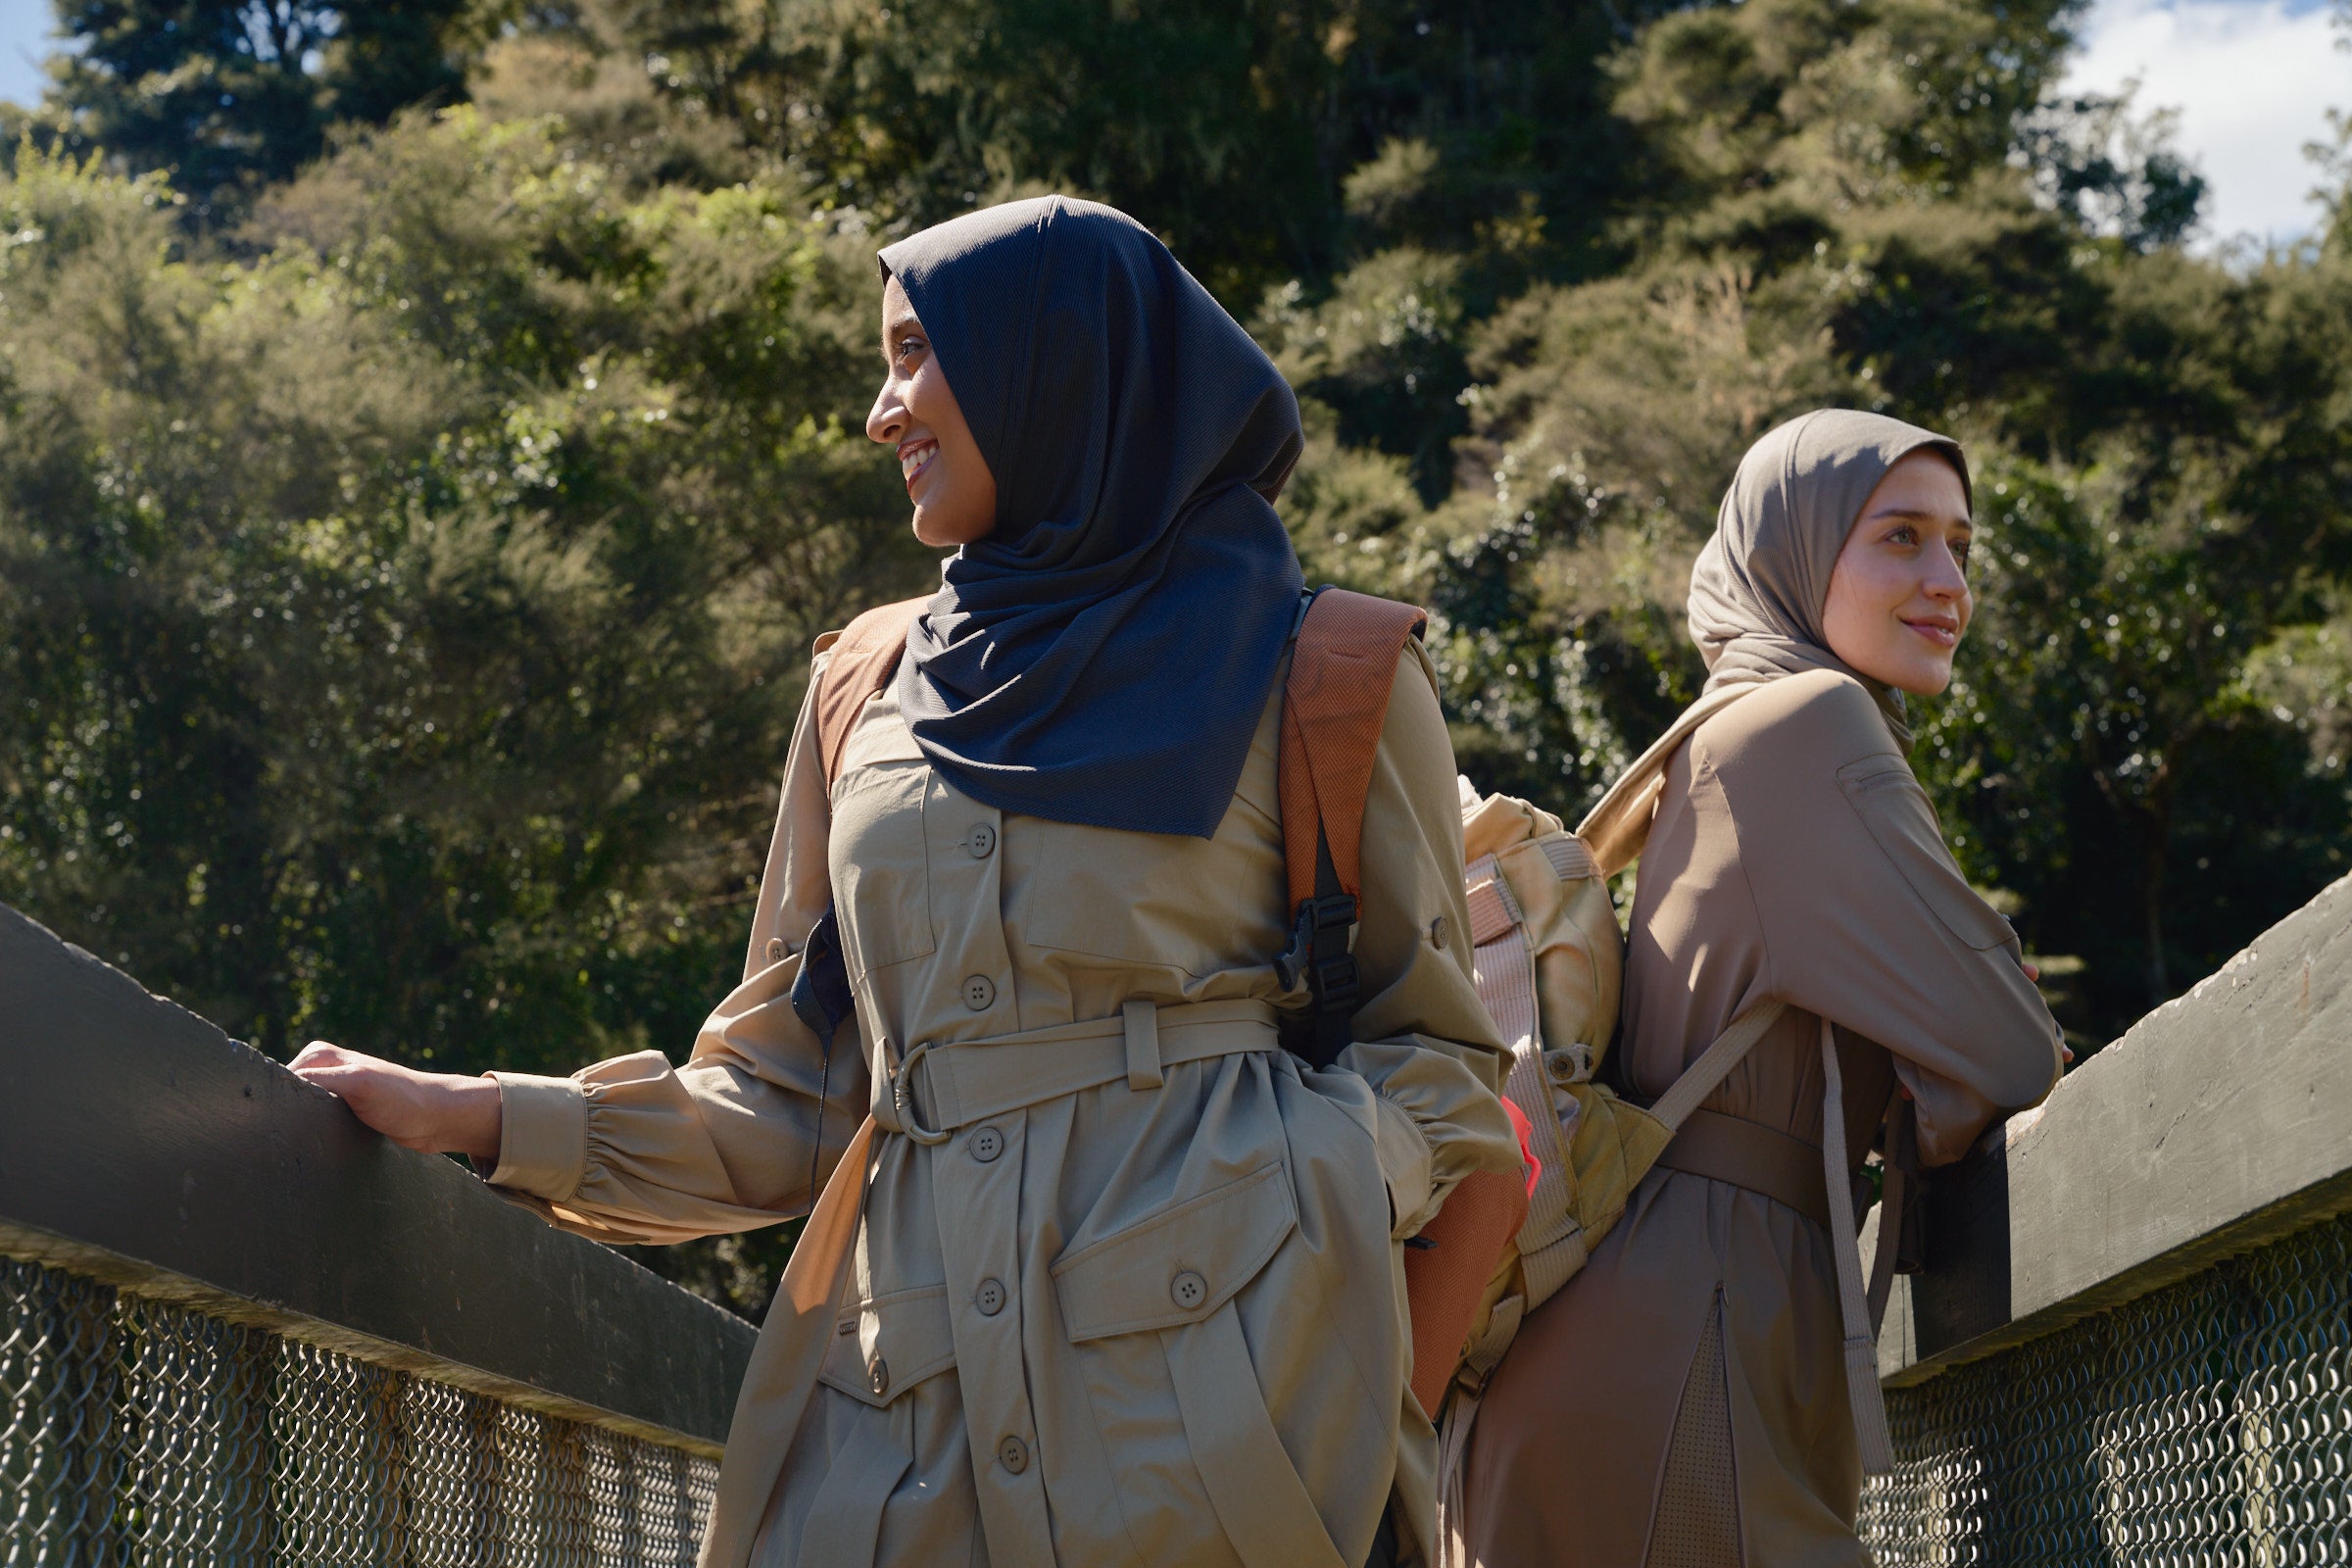 A Day Hike in Aotearoa (New Zealand) for Hijabi Adventurers: How to Prepare?